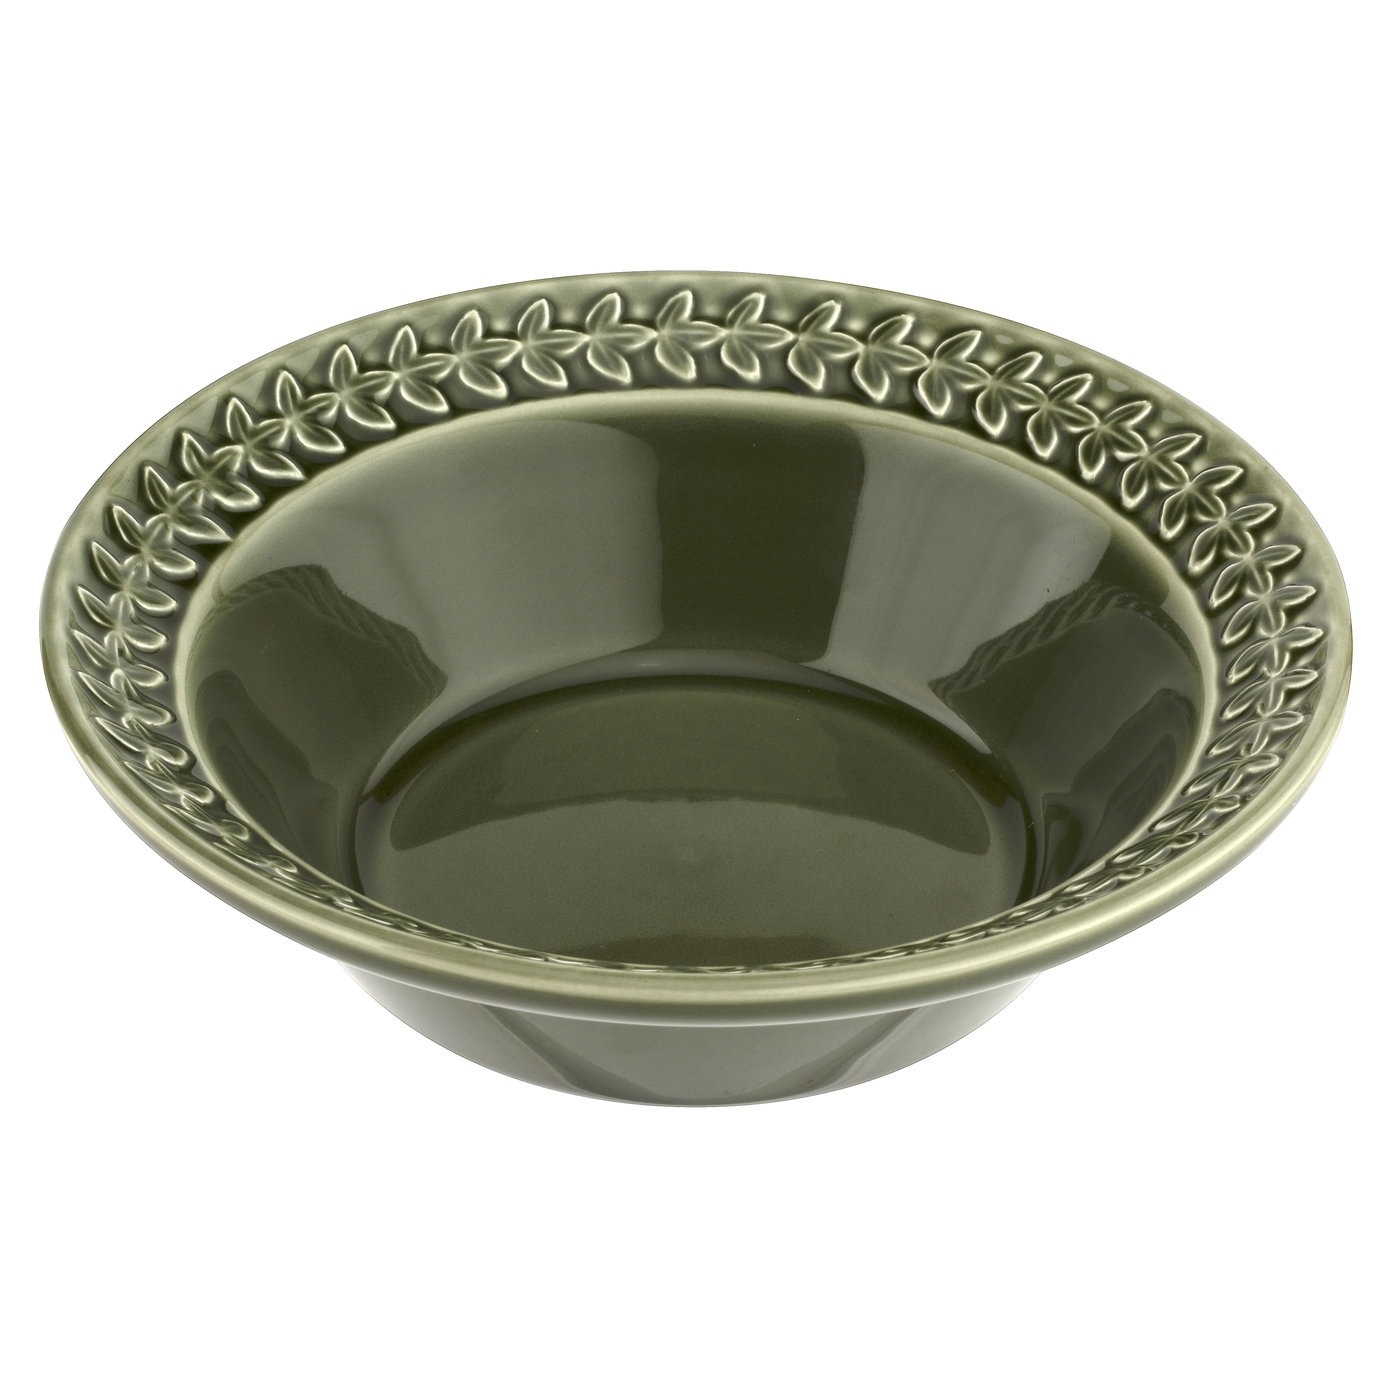 Botanic Garden Harmony Forest Green Cereal Bowl image number null